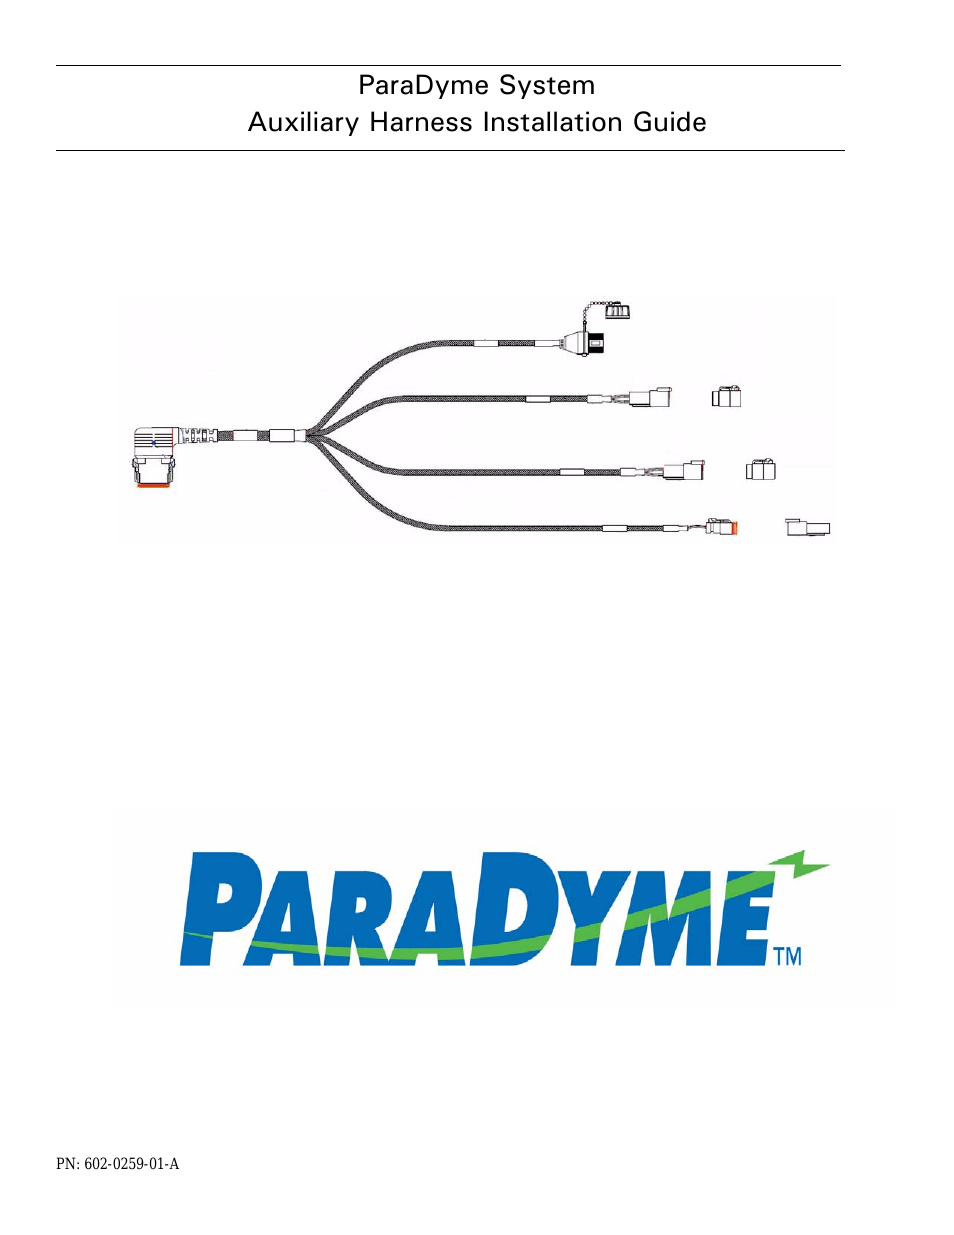 ParaDyme Auxiliary Harness Installation